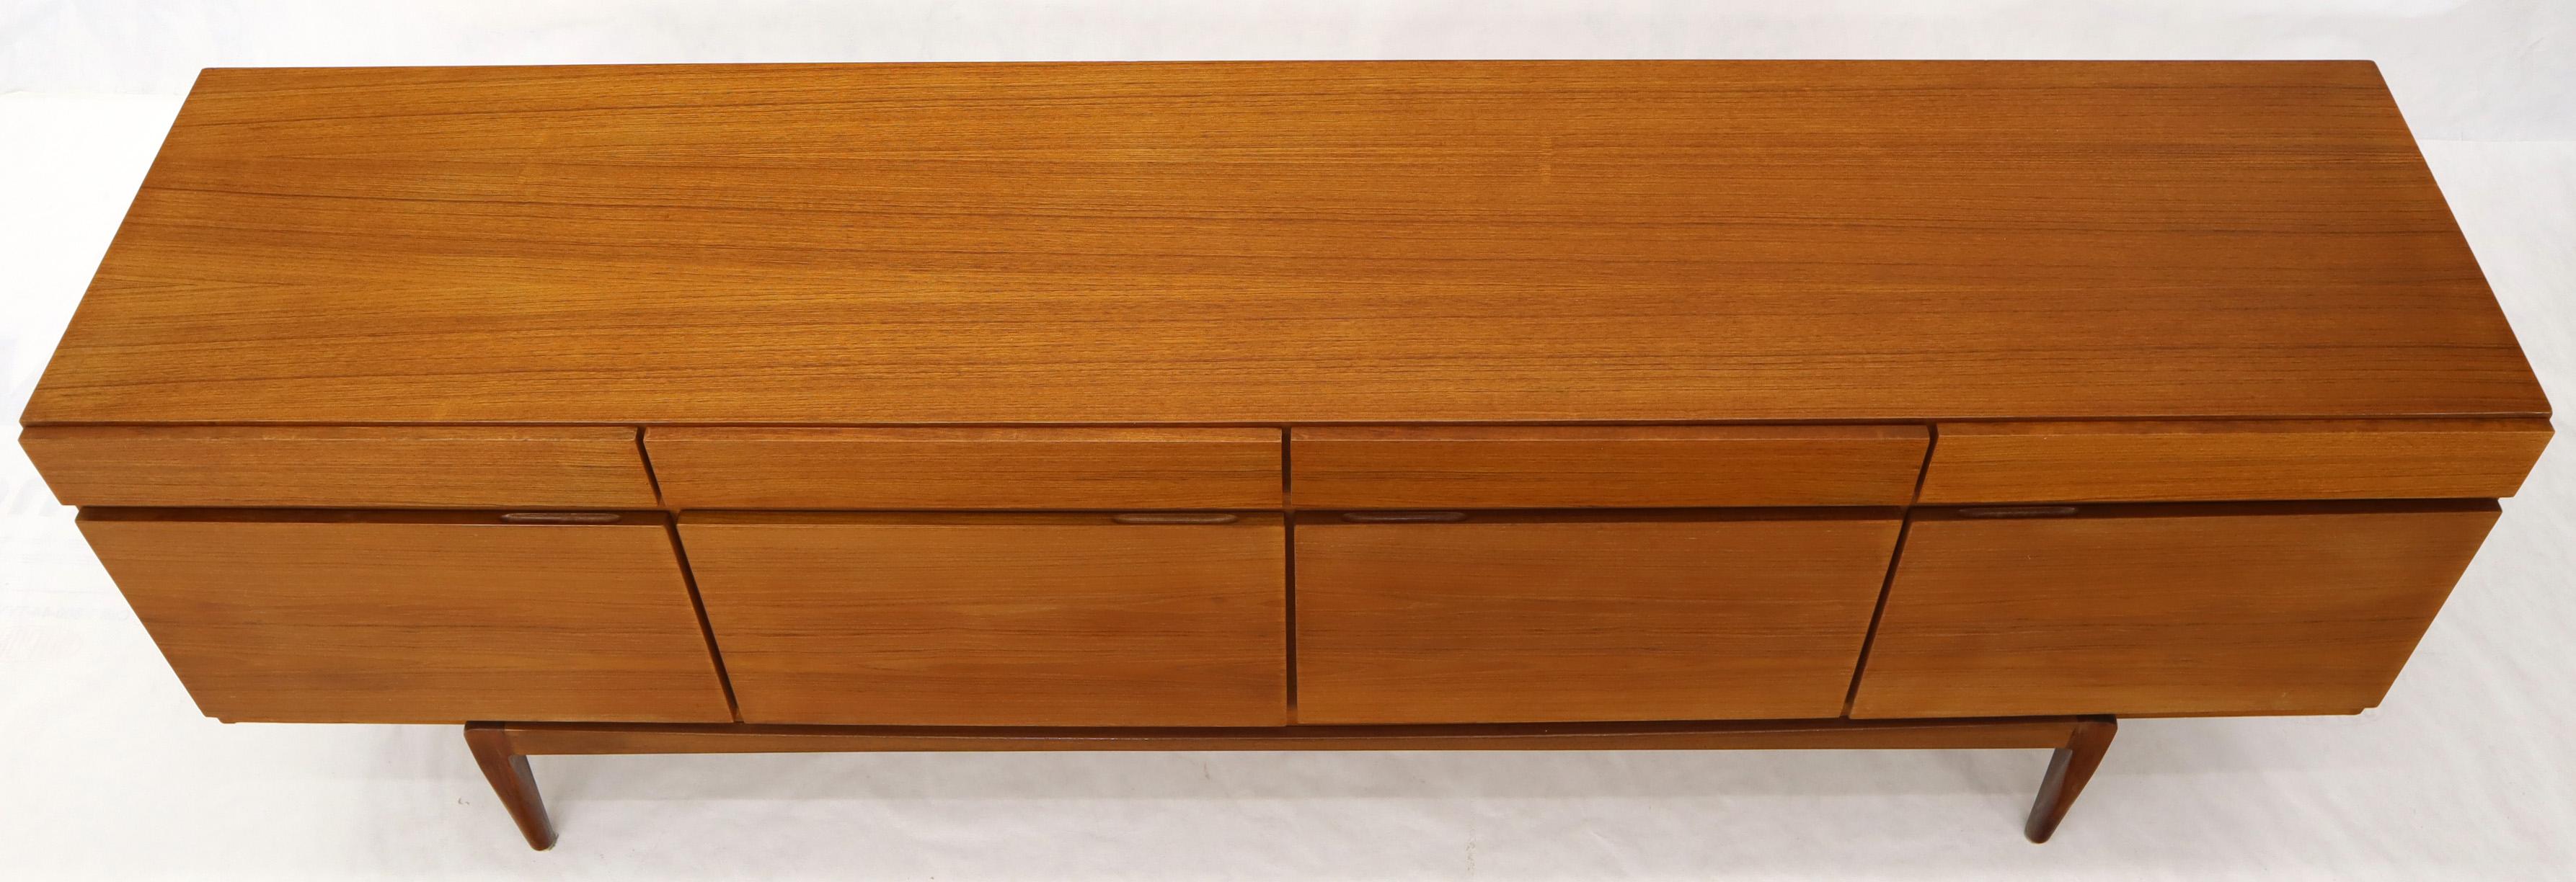 Teak Long Low Danish Mid-Century Modern Credenza Four Doors and Drawers Compartments 